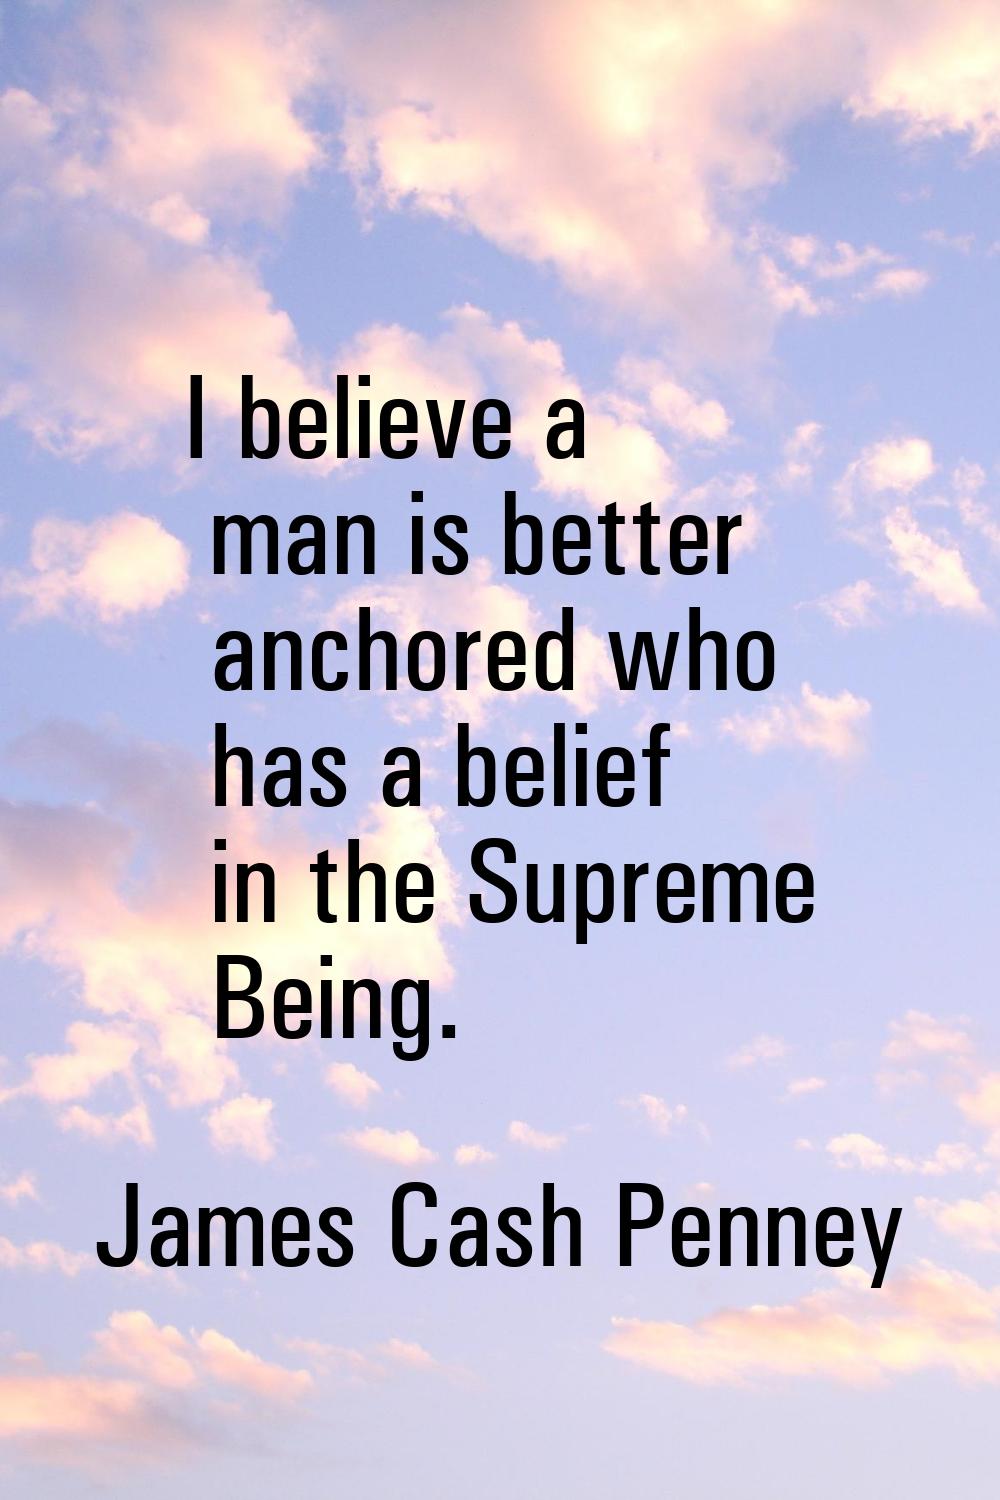 I believe a man is better anchored who has a belief in the Supreme Being.